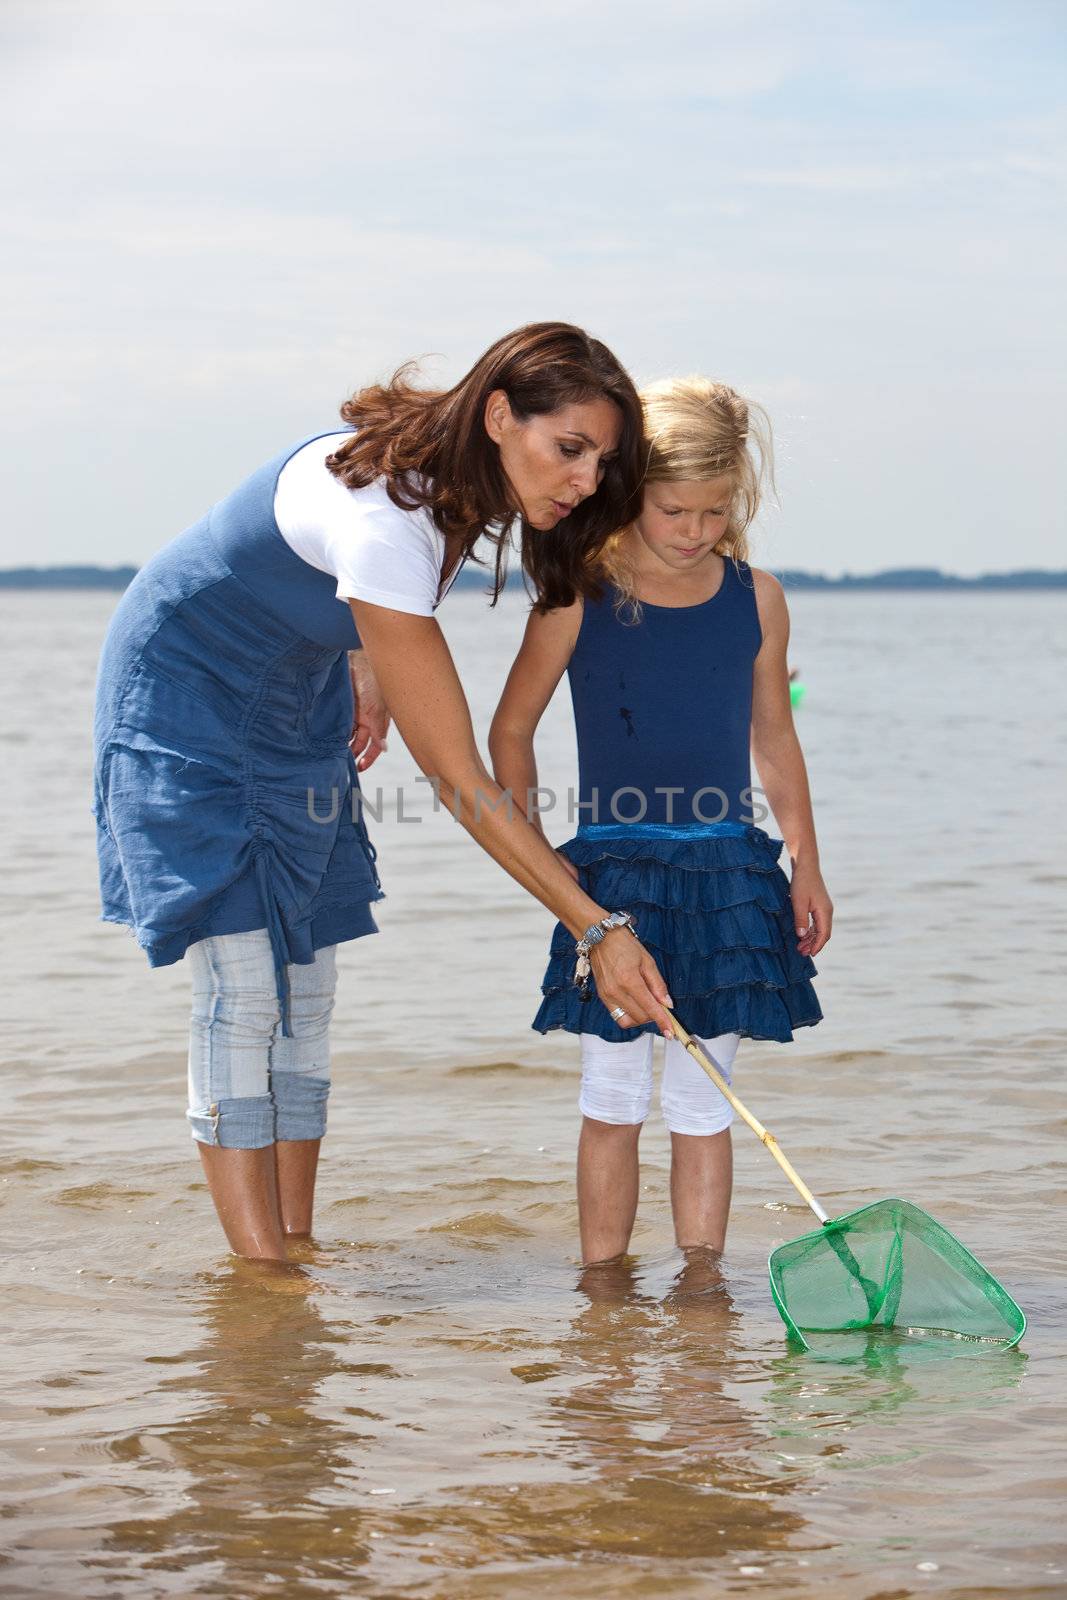 Mother and daughter searching for fish by Fotosmurf